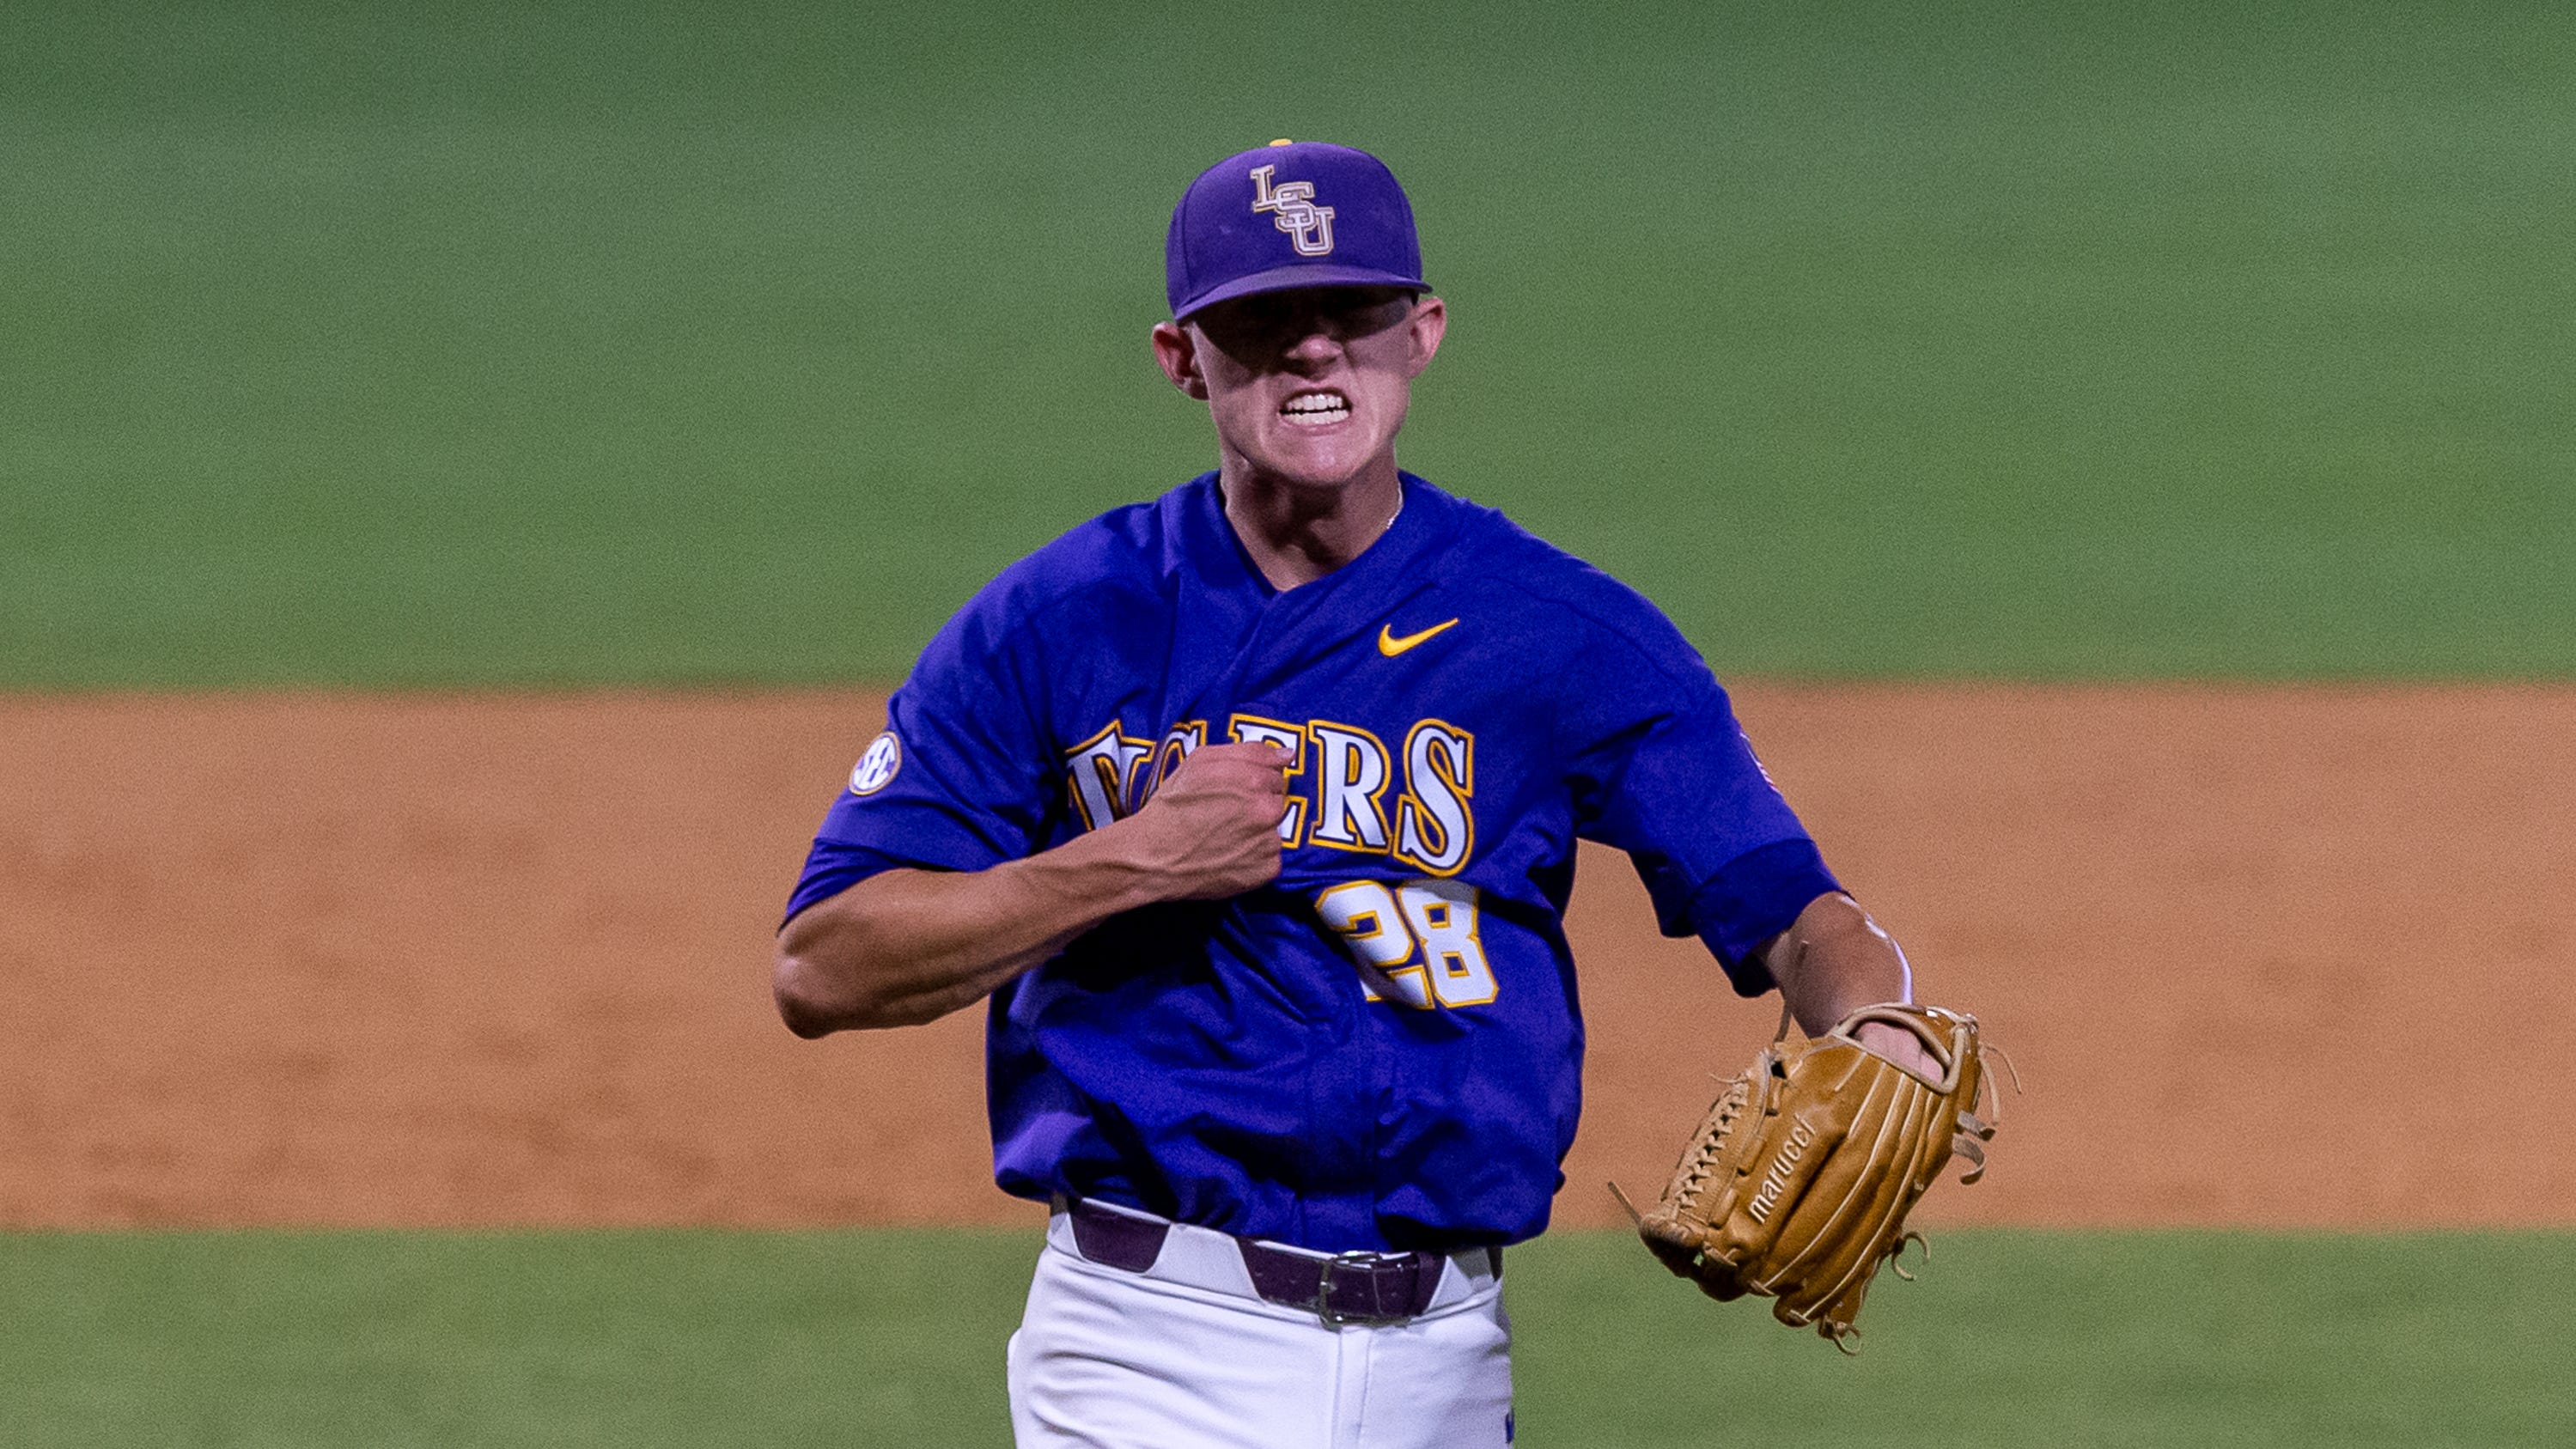 LSU baseball Here is the projected starting lineup, pitching rotation